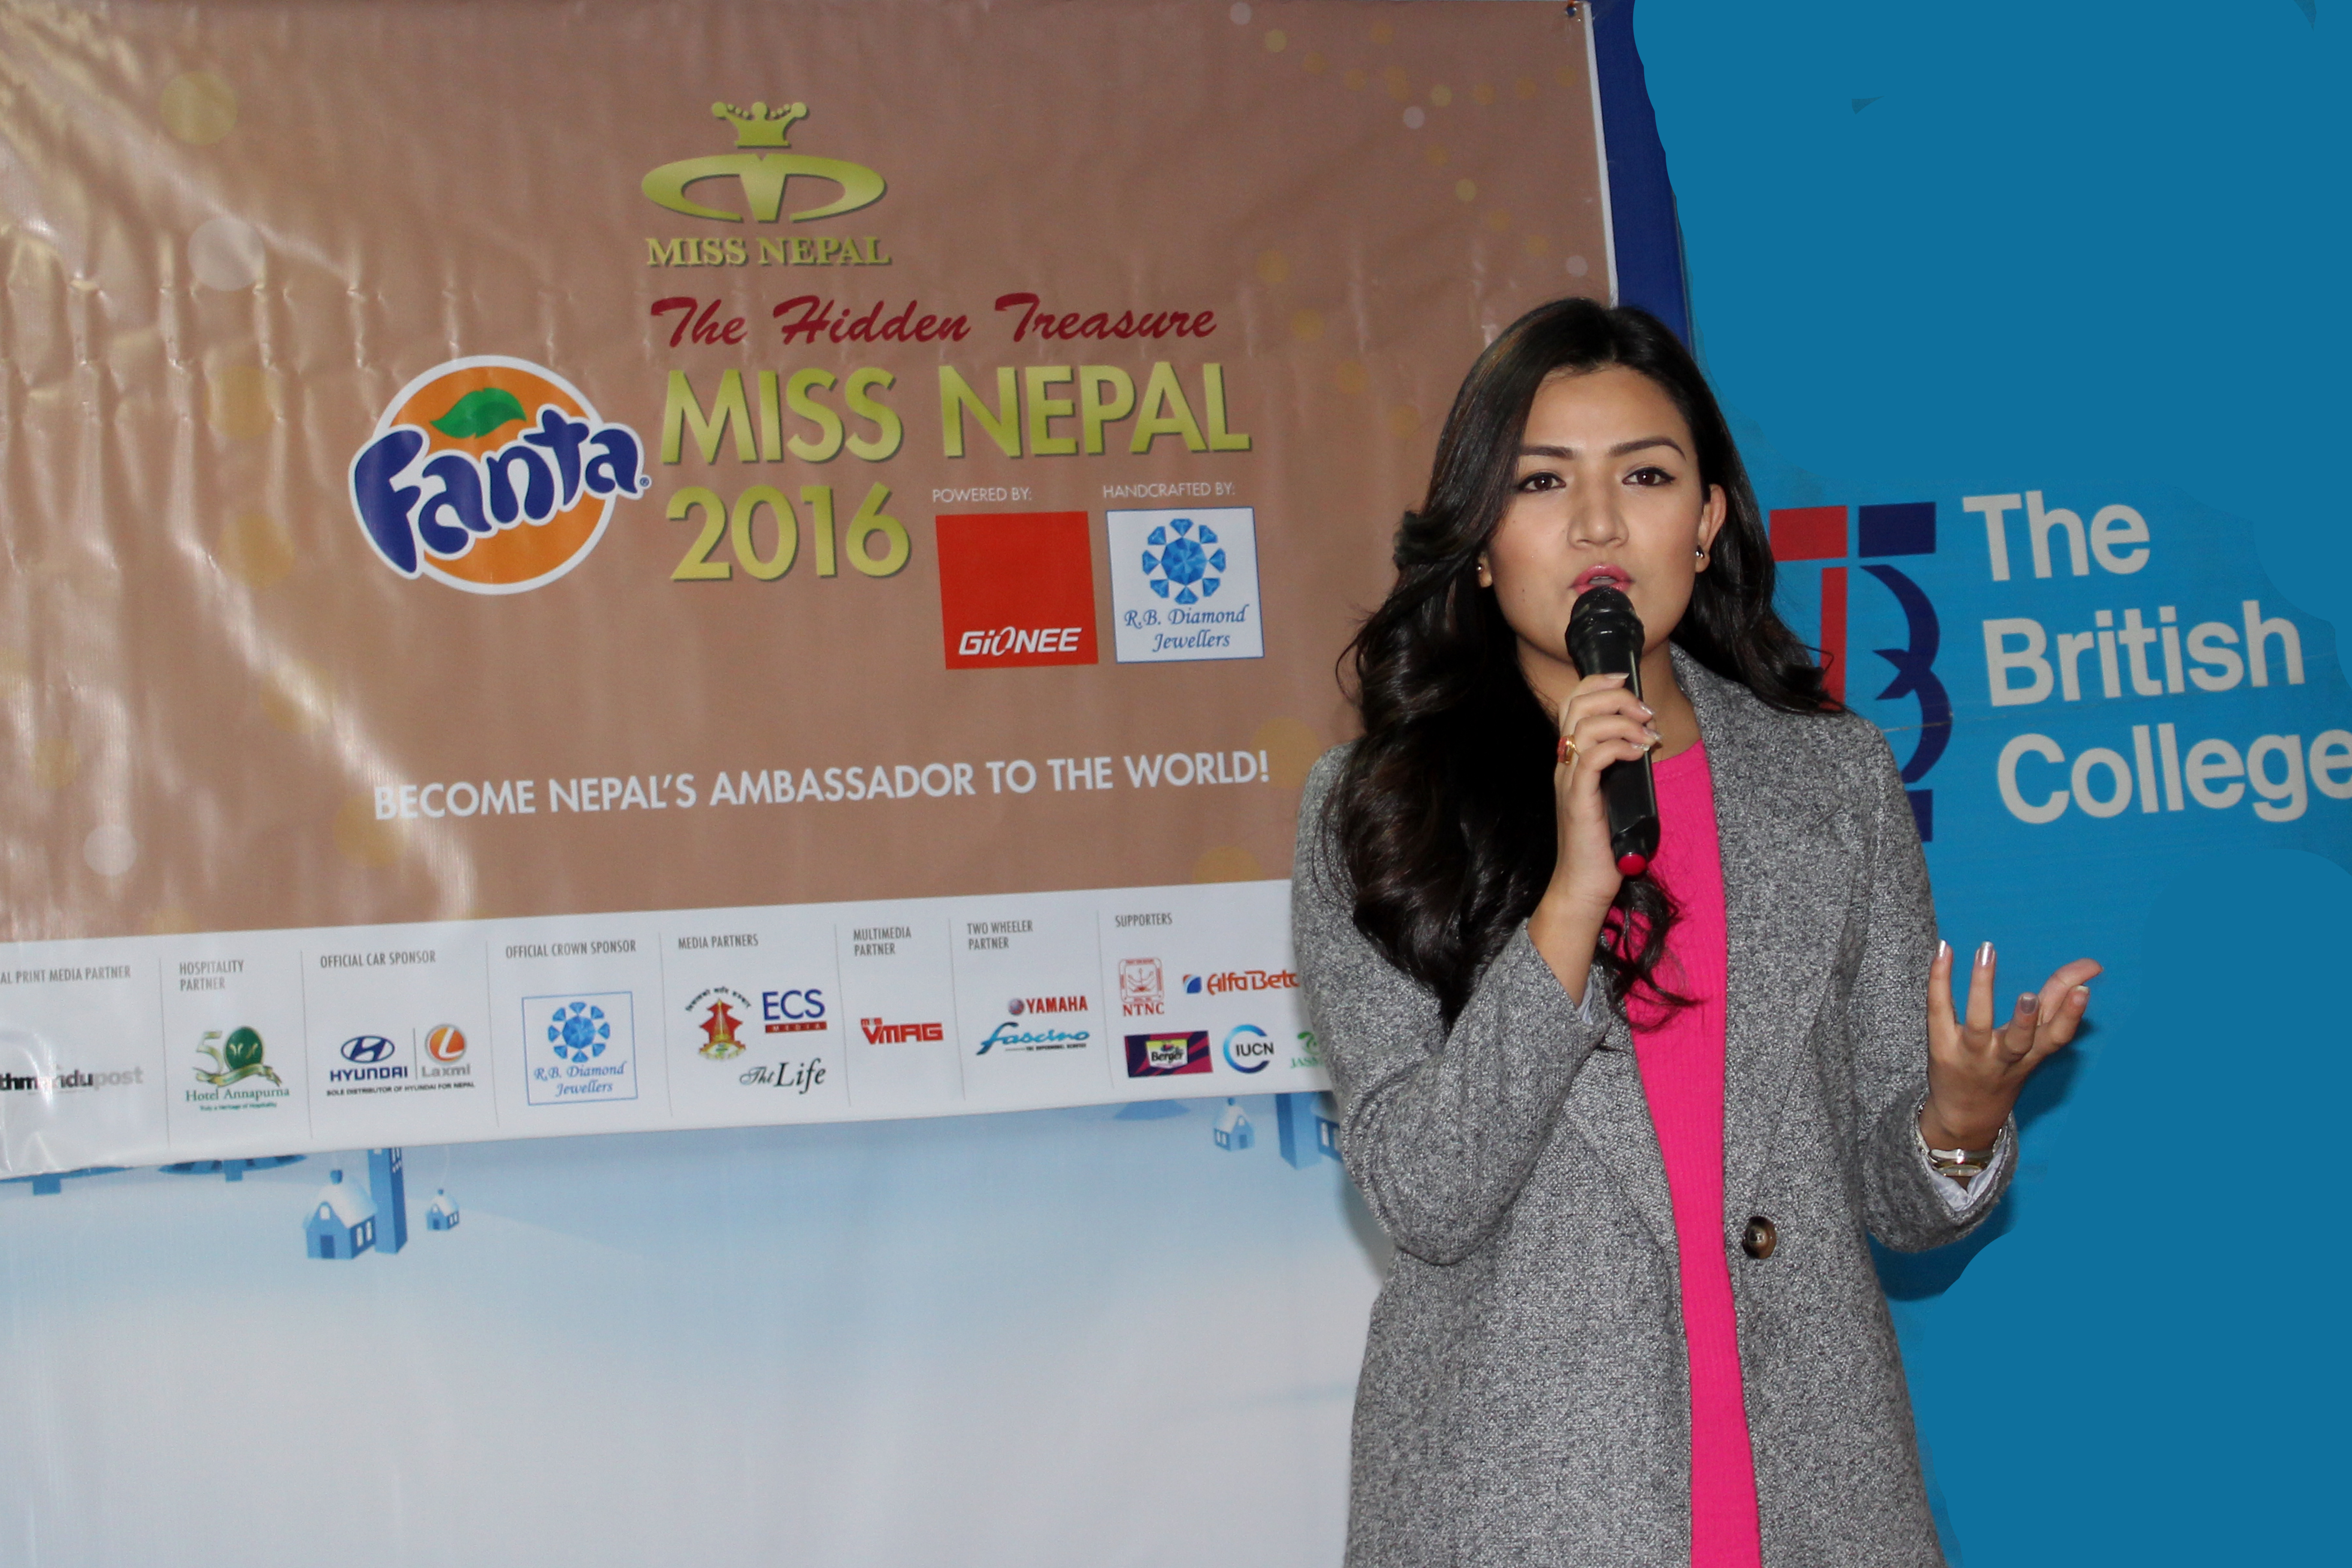 Miss Nepal 2016 Activation Campaign at TBC